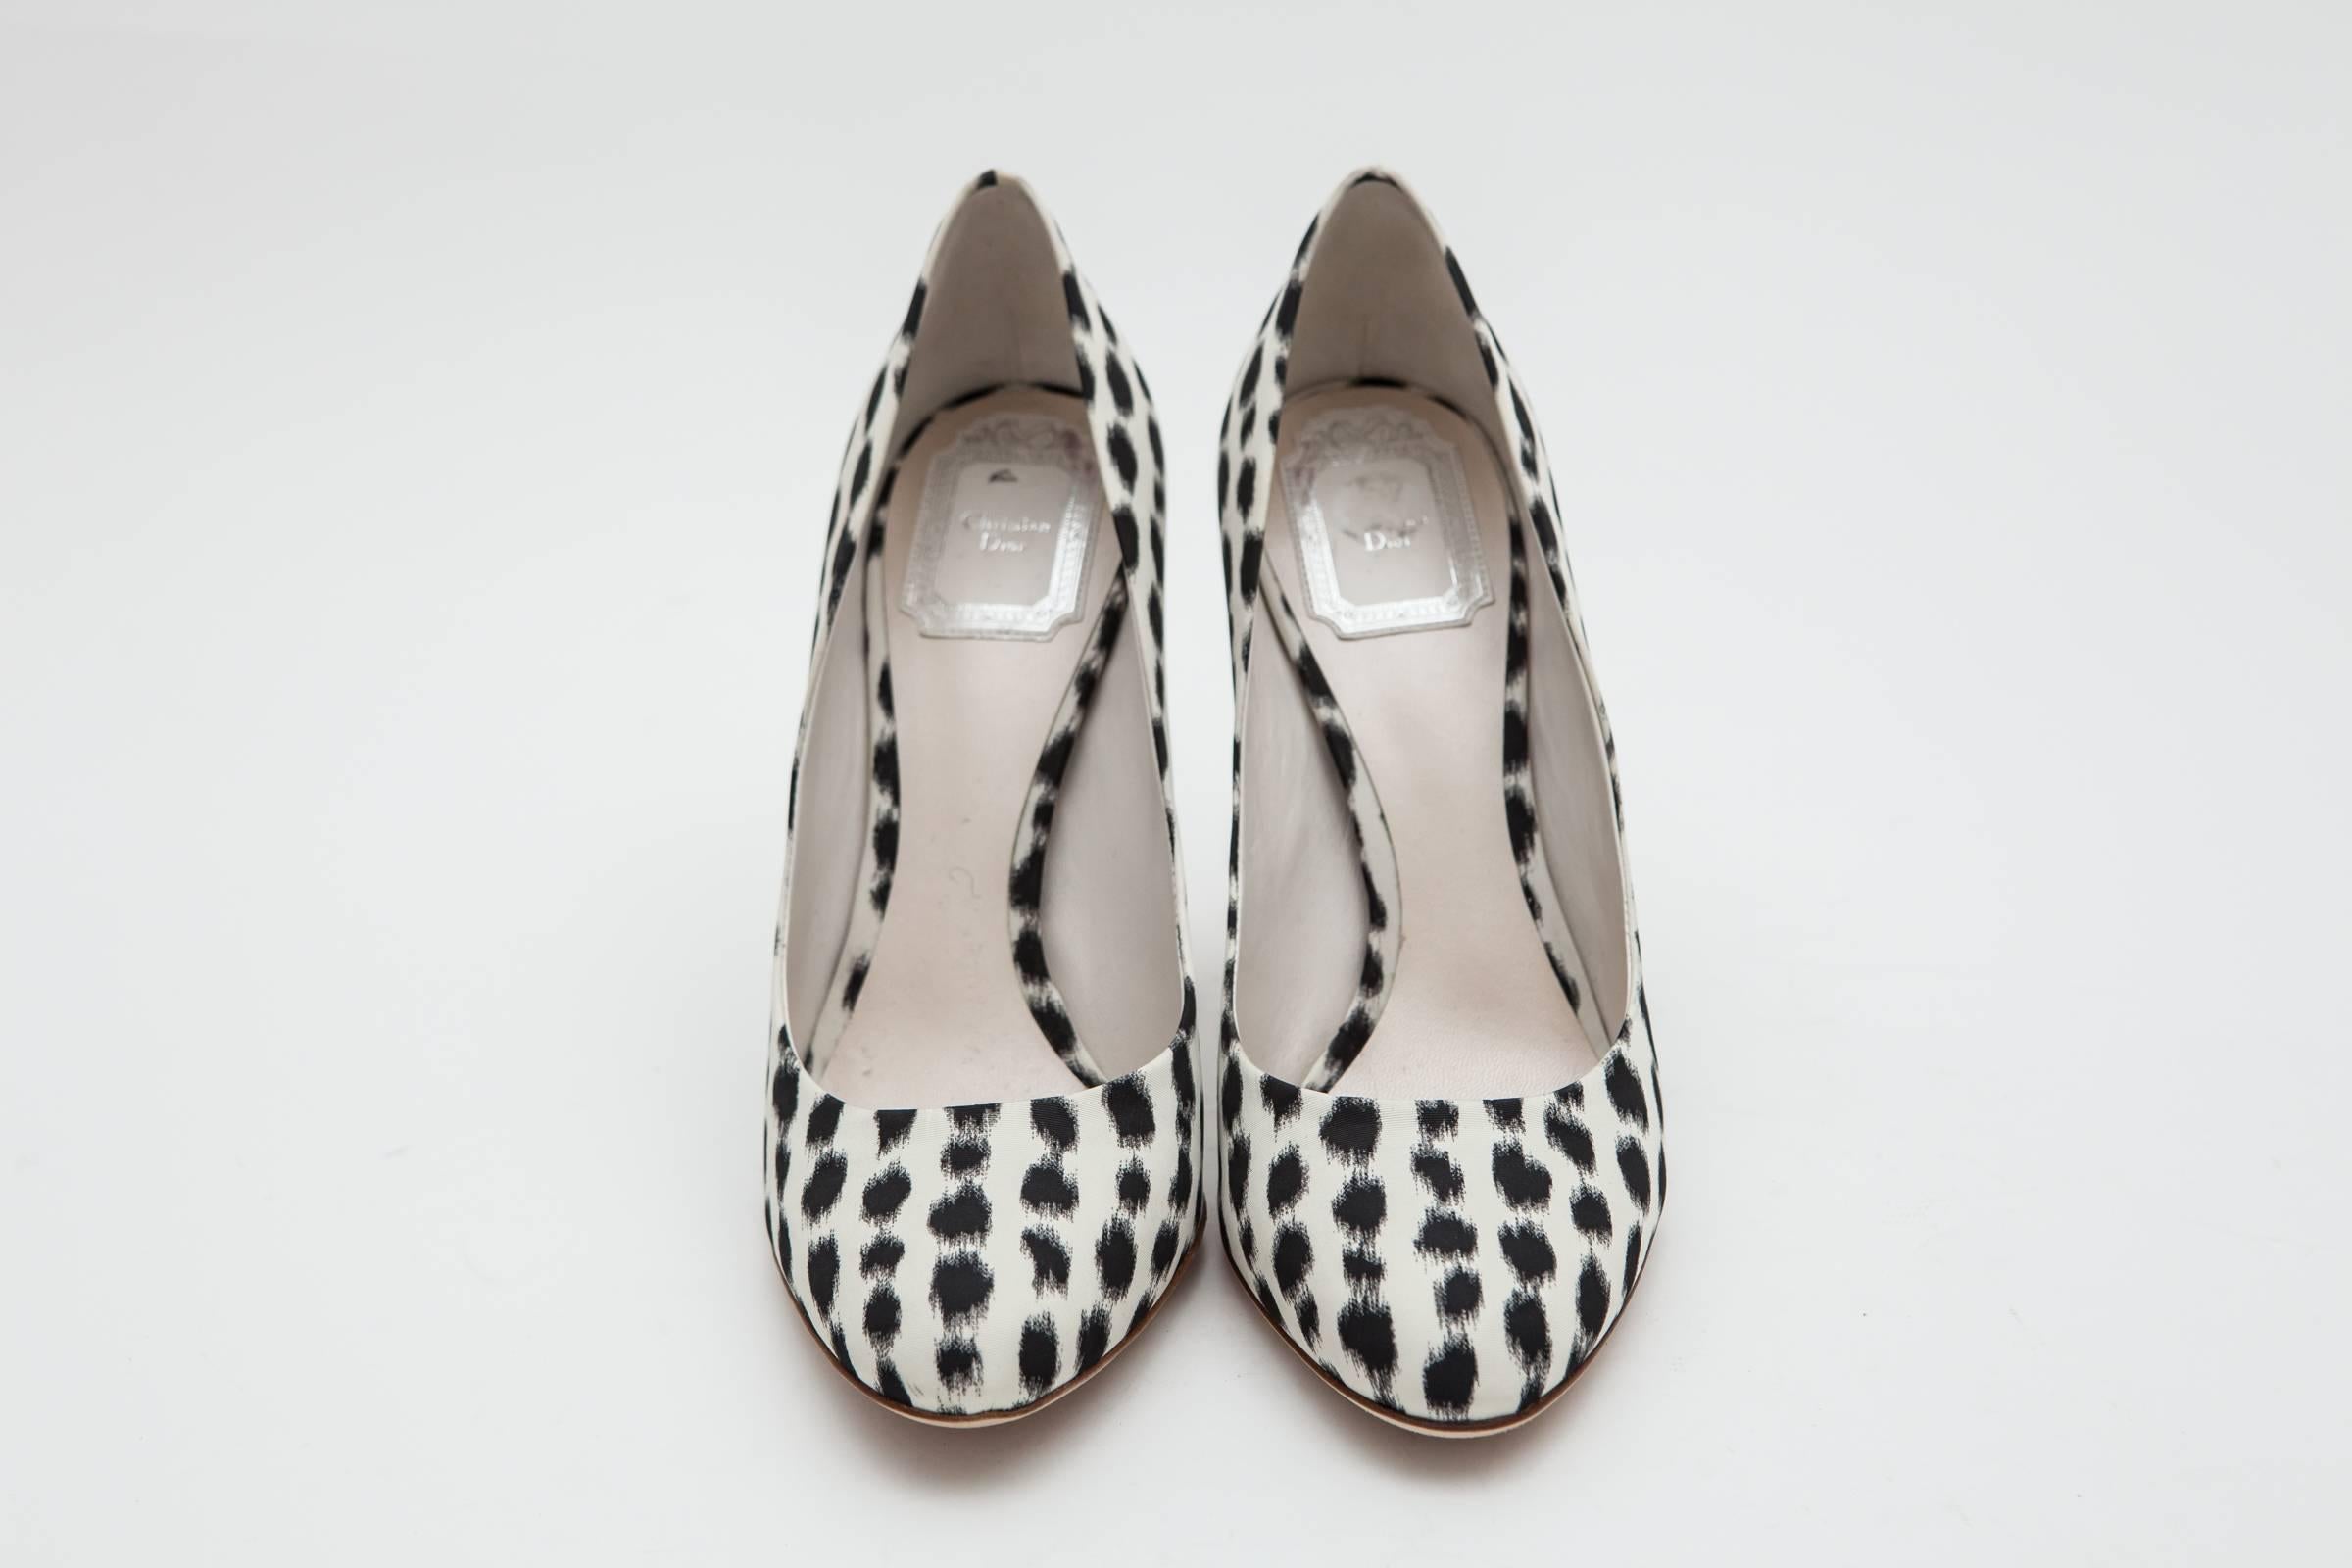 Black and ivory patterned  satin pumps.